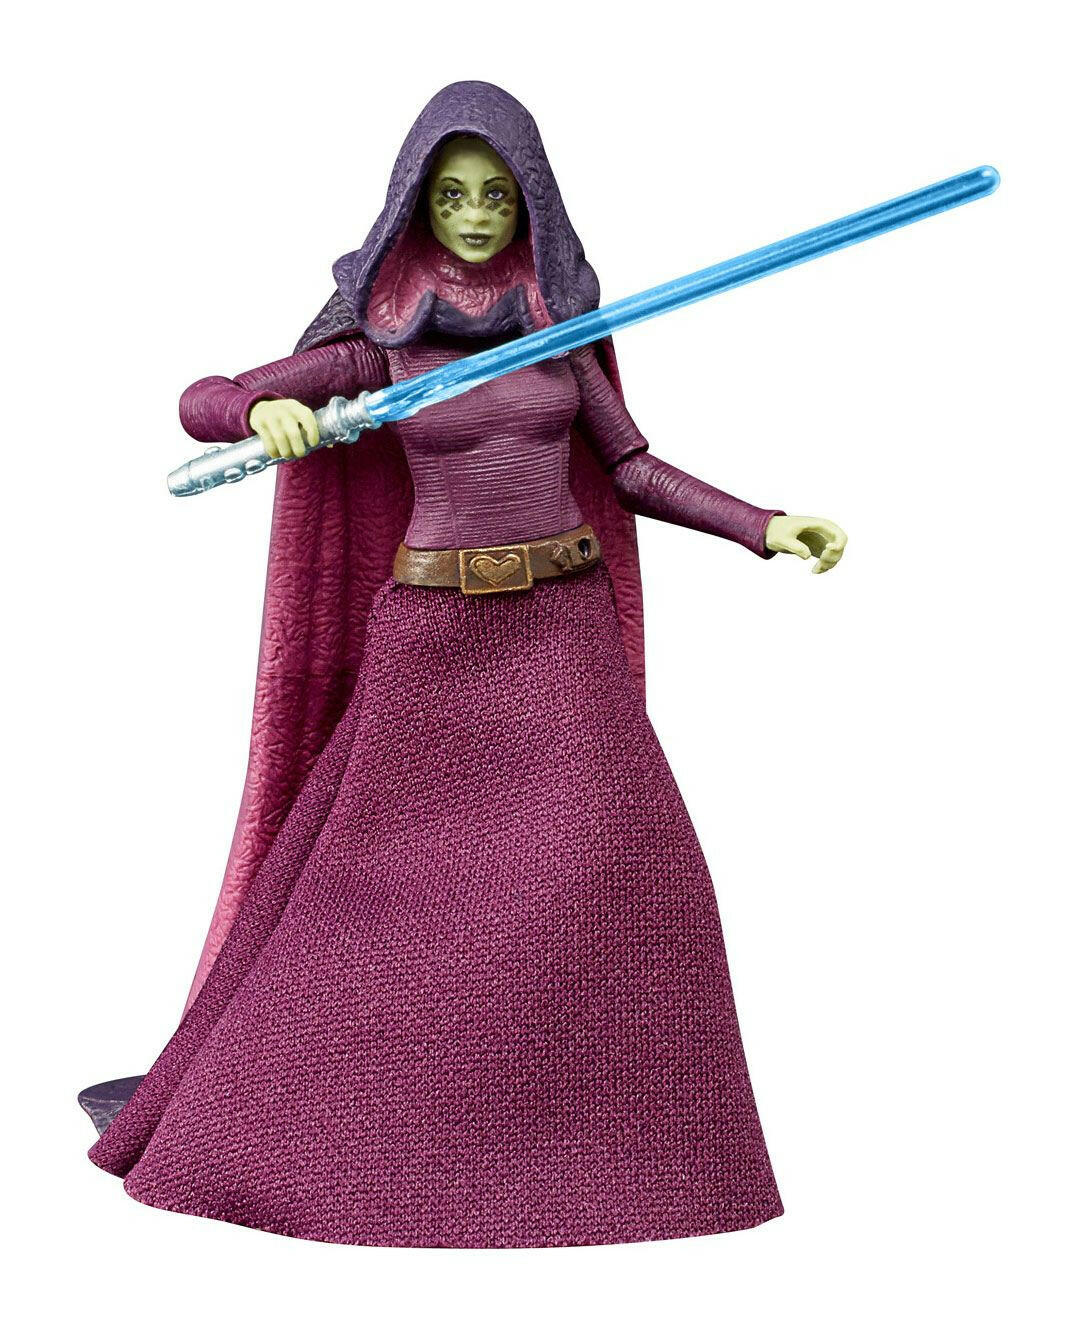 Star Wars Vintage Collection Clone Wars Barriss Offee 10cm Hasbro